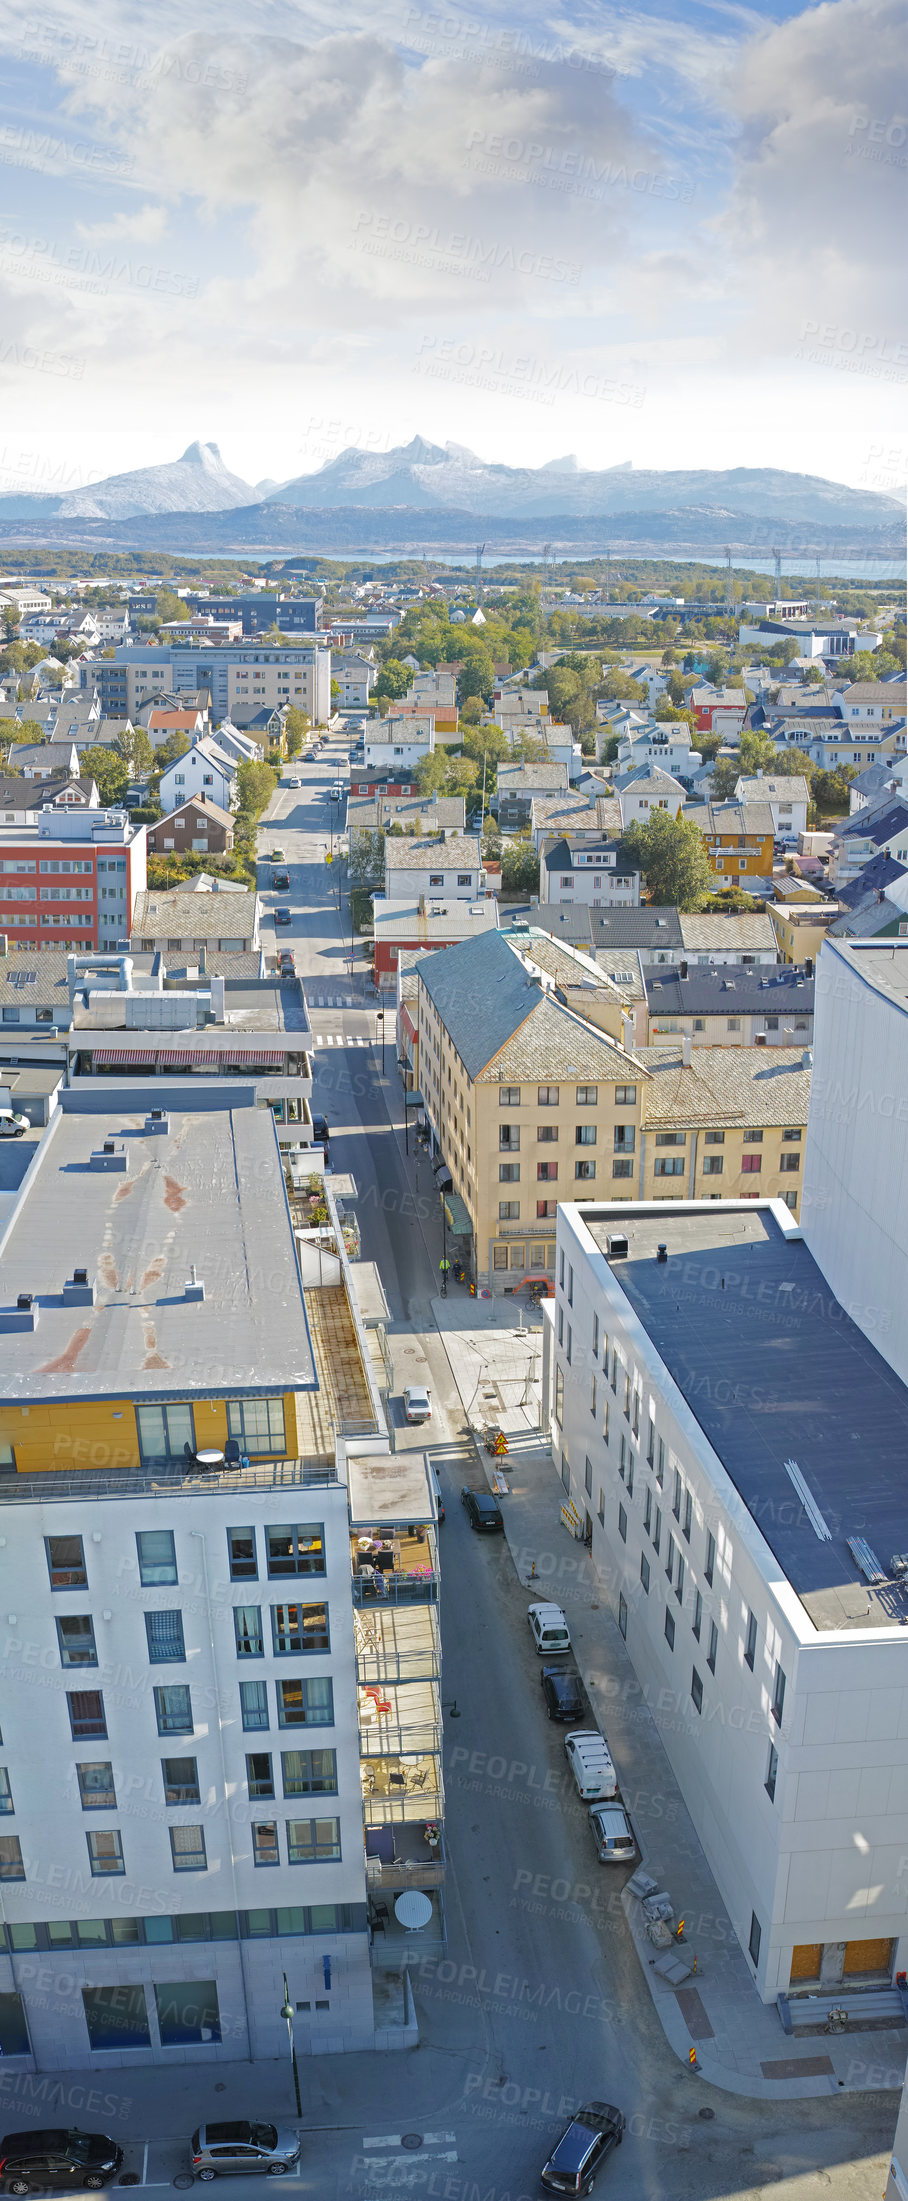 Buy stock photo Above view of urban city streets in popular overseas travel destination in Bodo, Norway. Busy downtown centre and urban infrastructure of building architecture with scenic mountains in the background